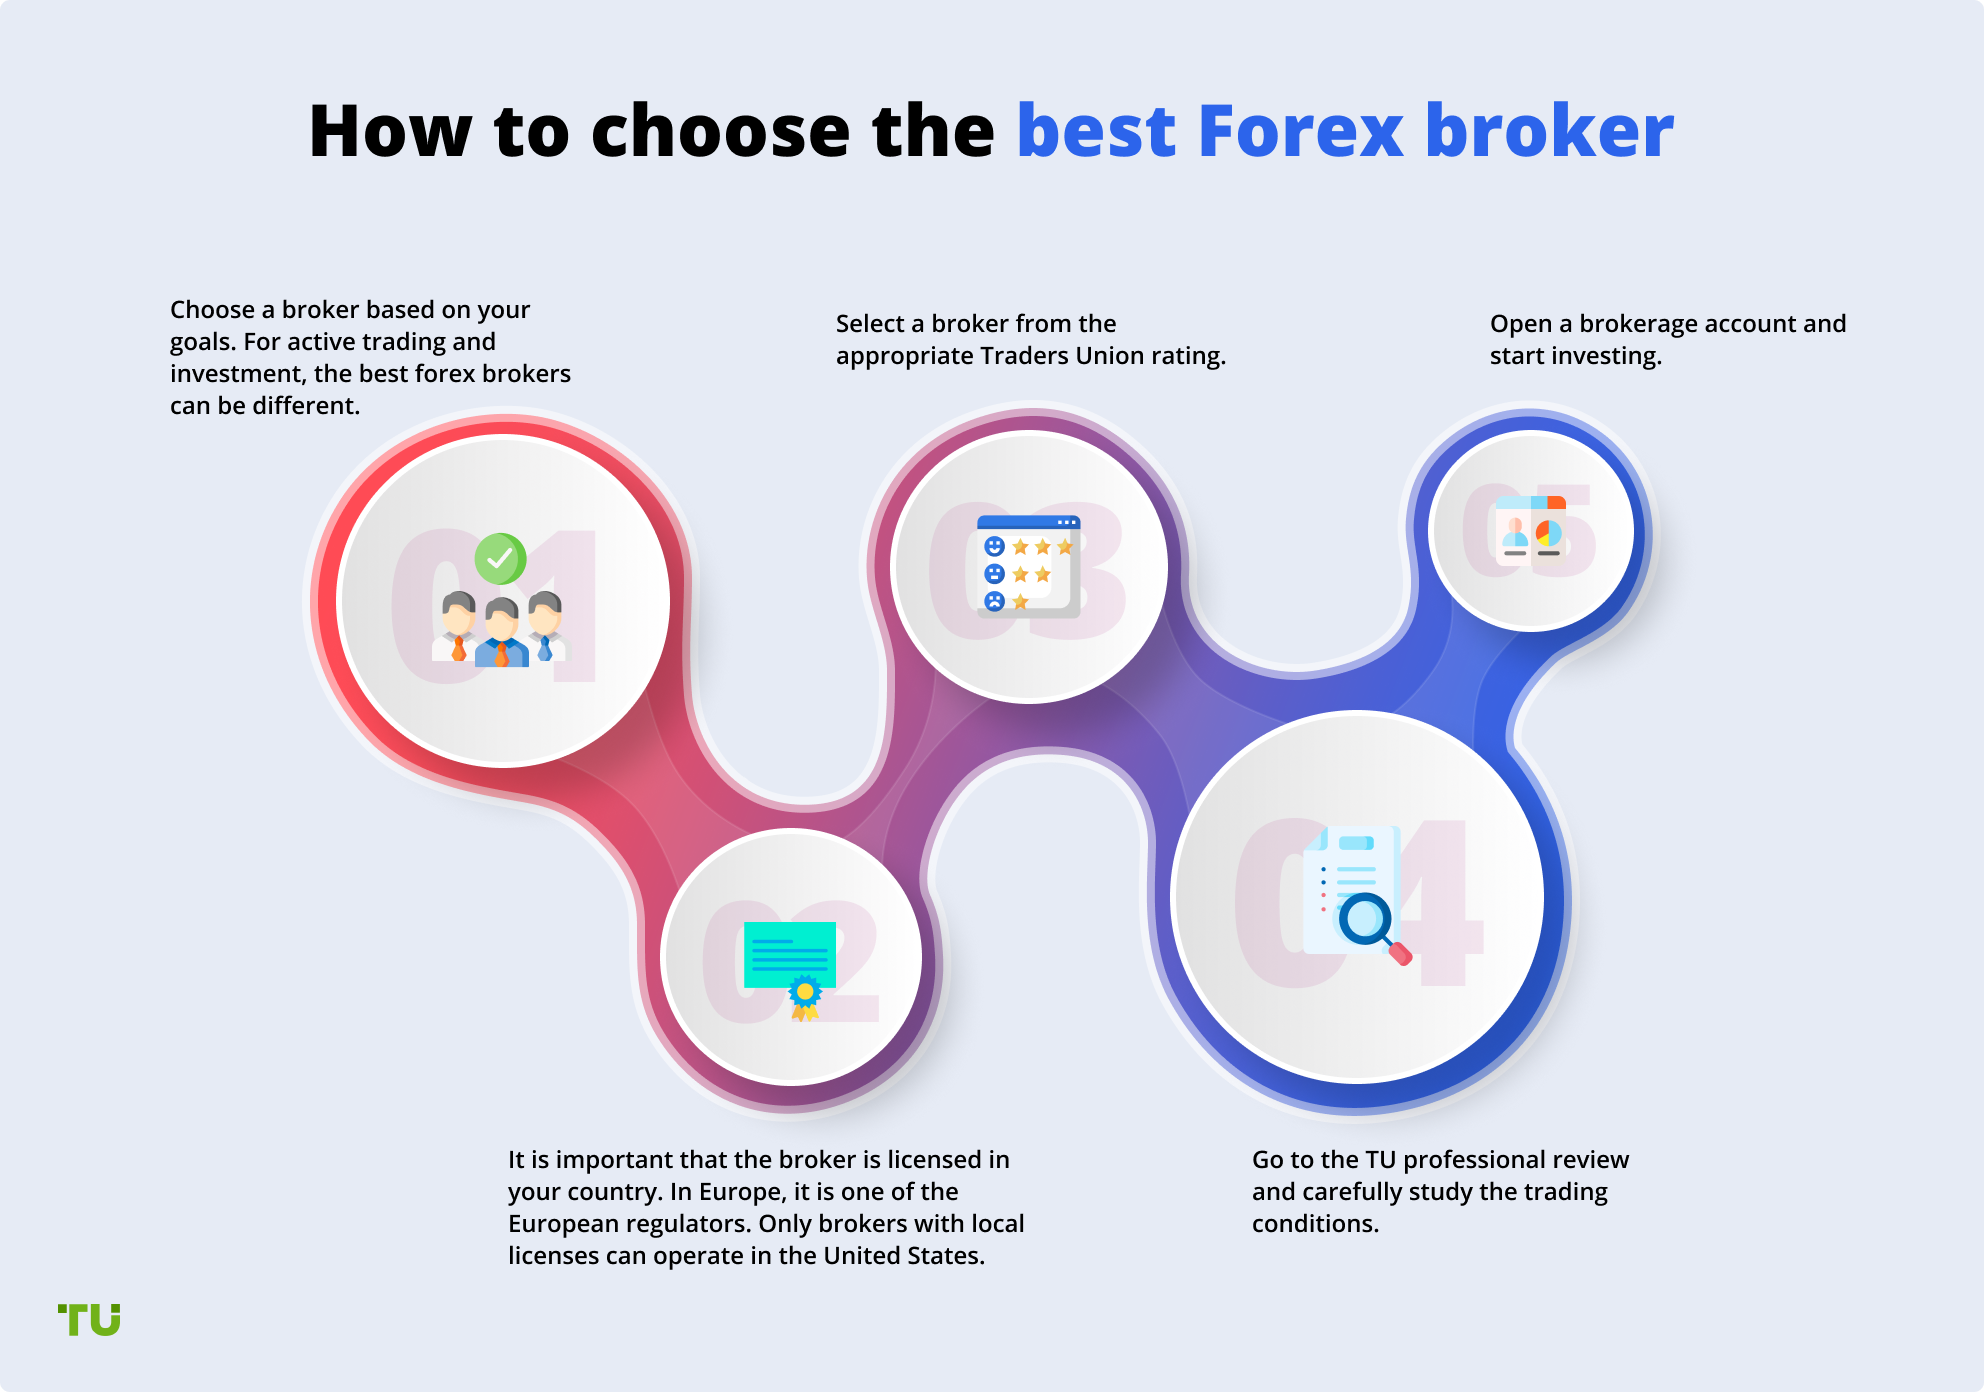 Commission only forex brokers forexyard strategy automator tomato